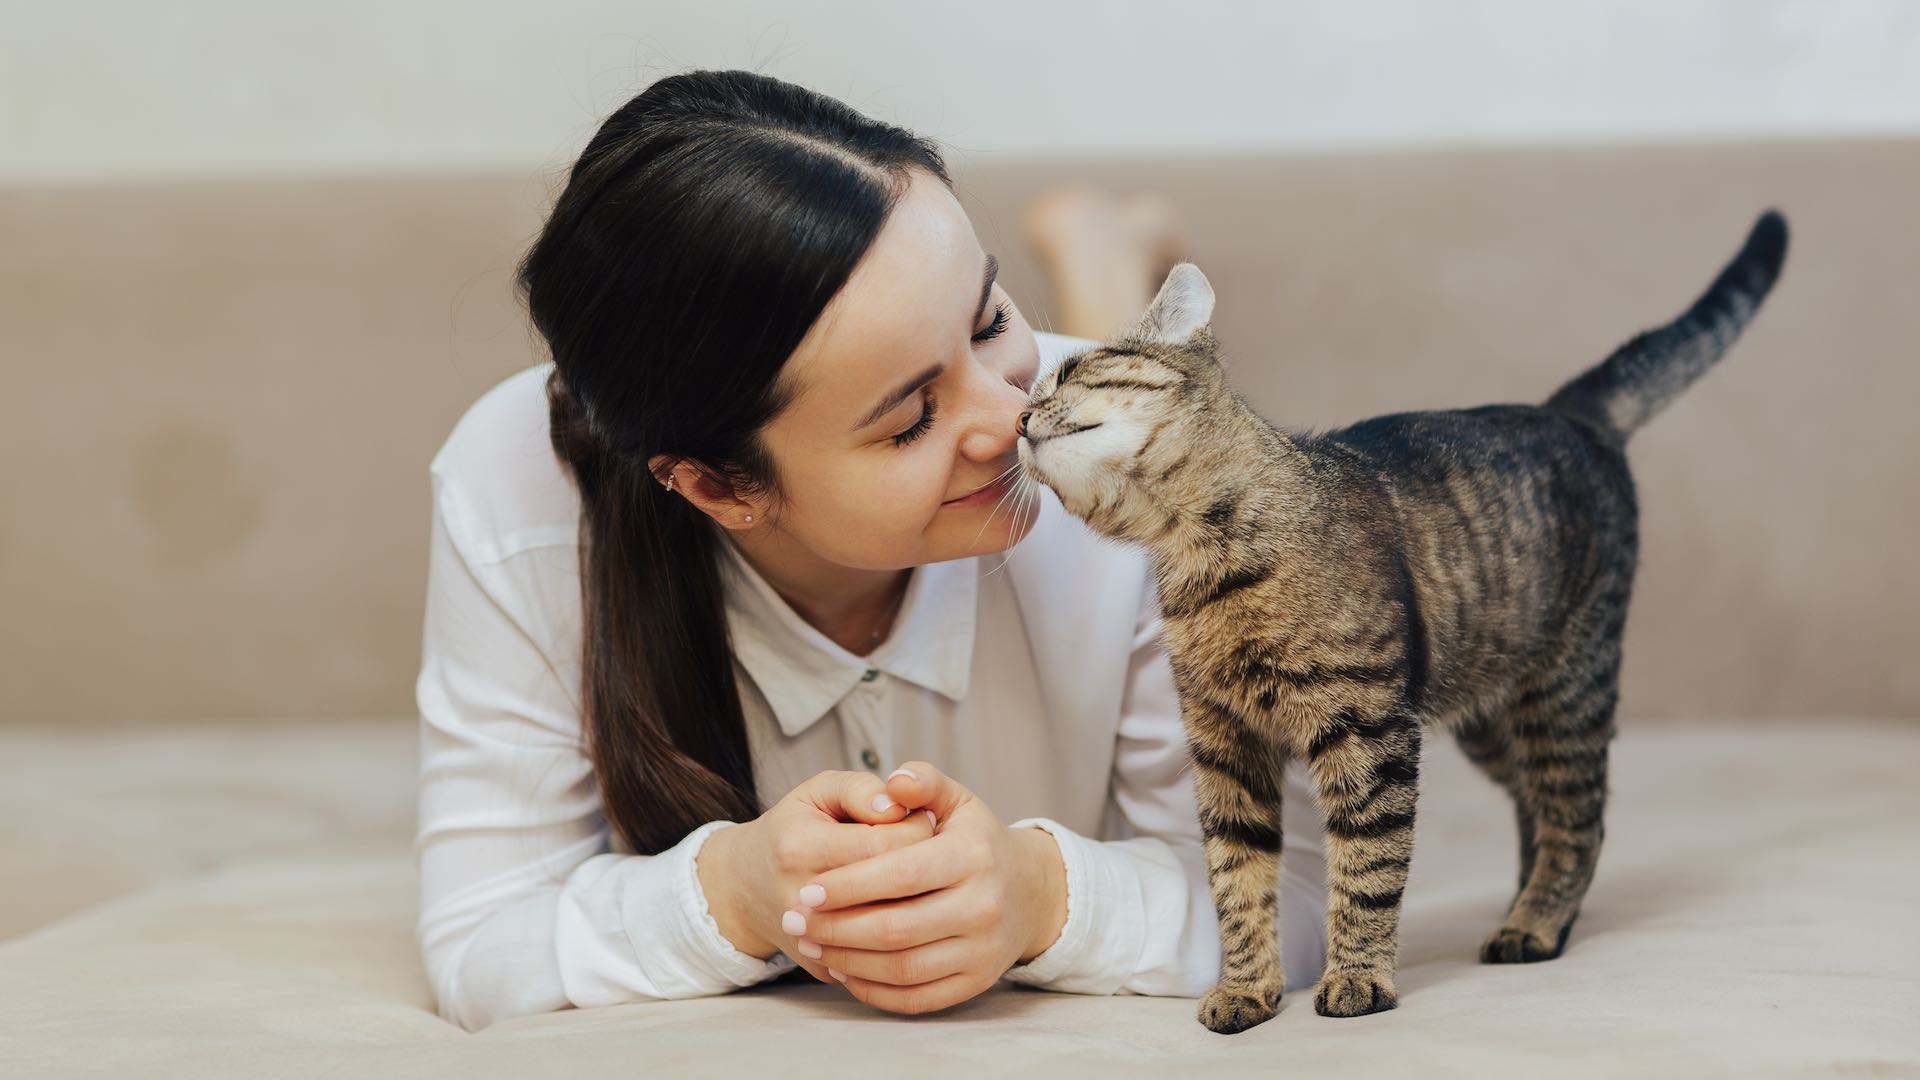 Study links cat ownership to increased schizophrenia risk, calls for further research